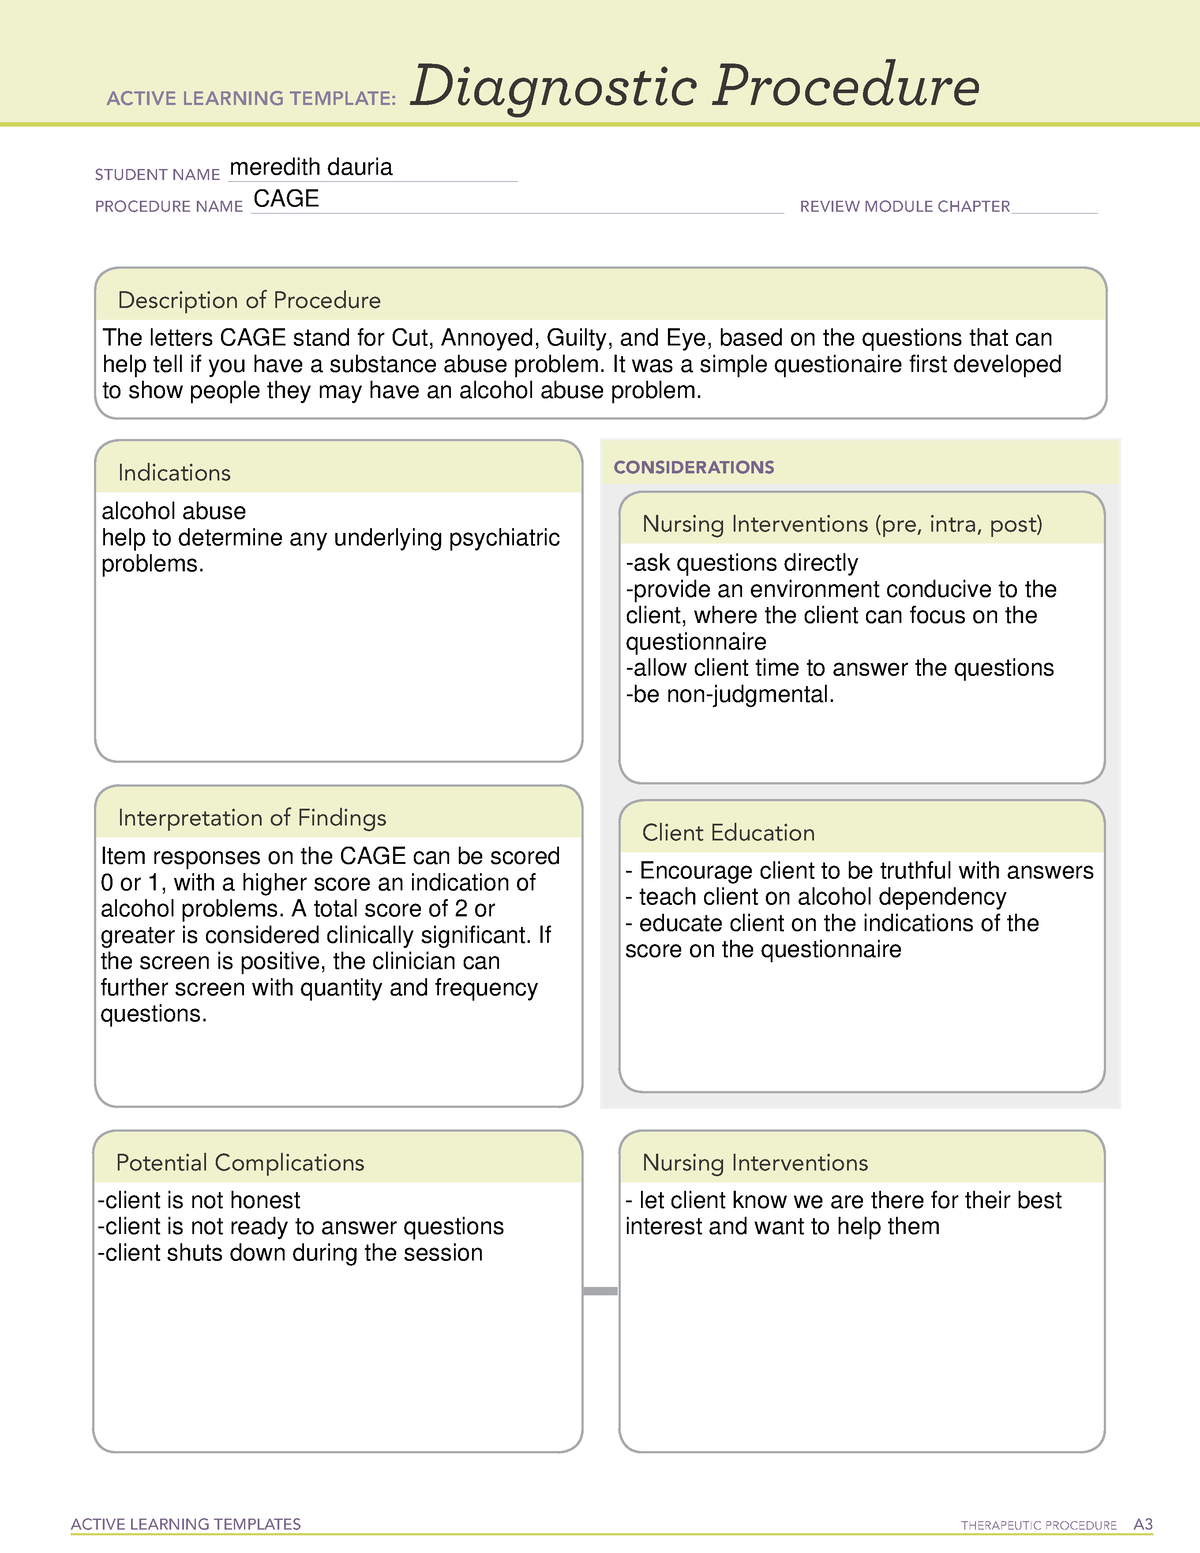 ATI active learning template CAGE - ACTIVE LEARNING TEMPLATES ...